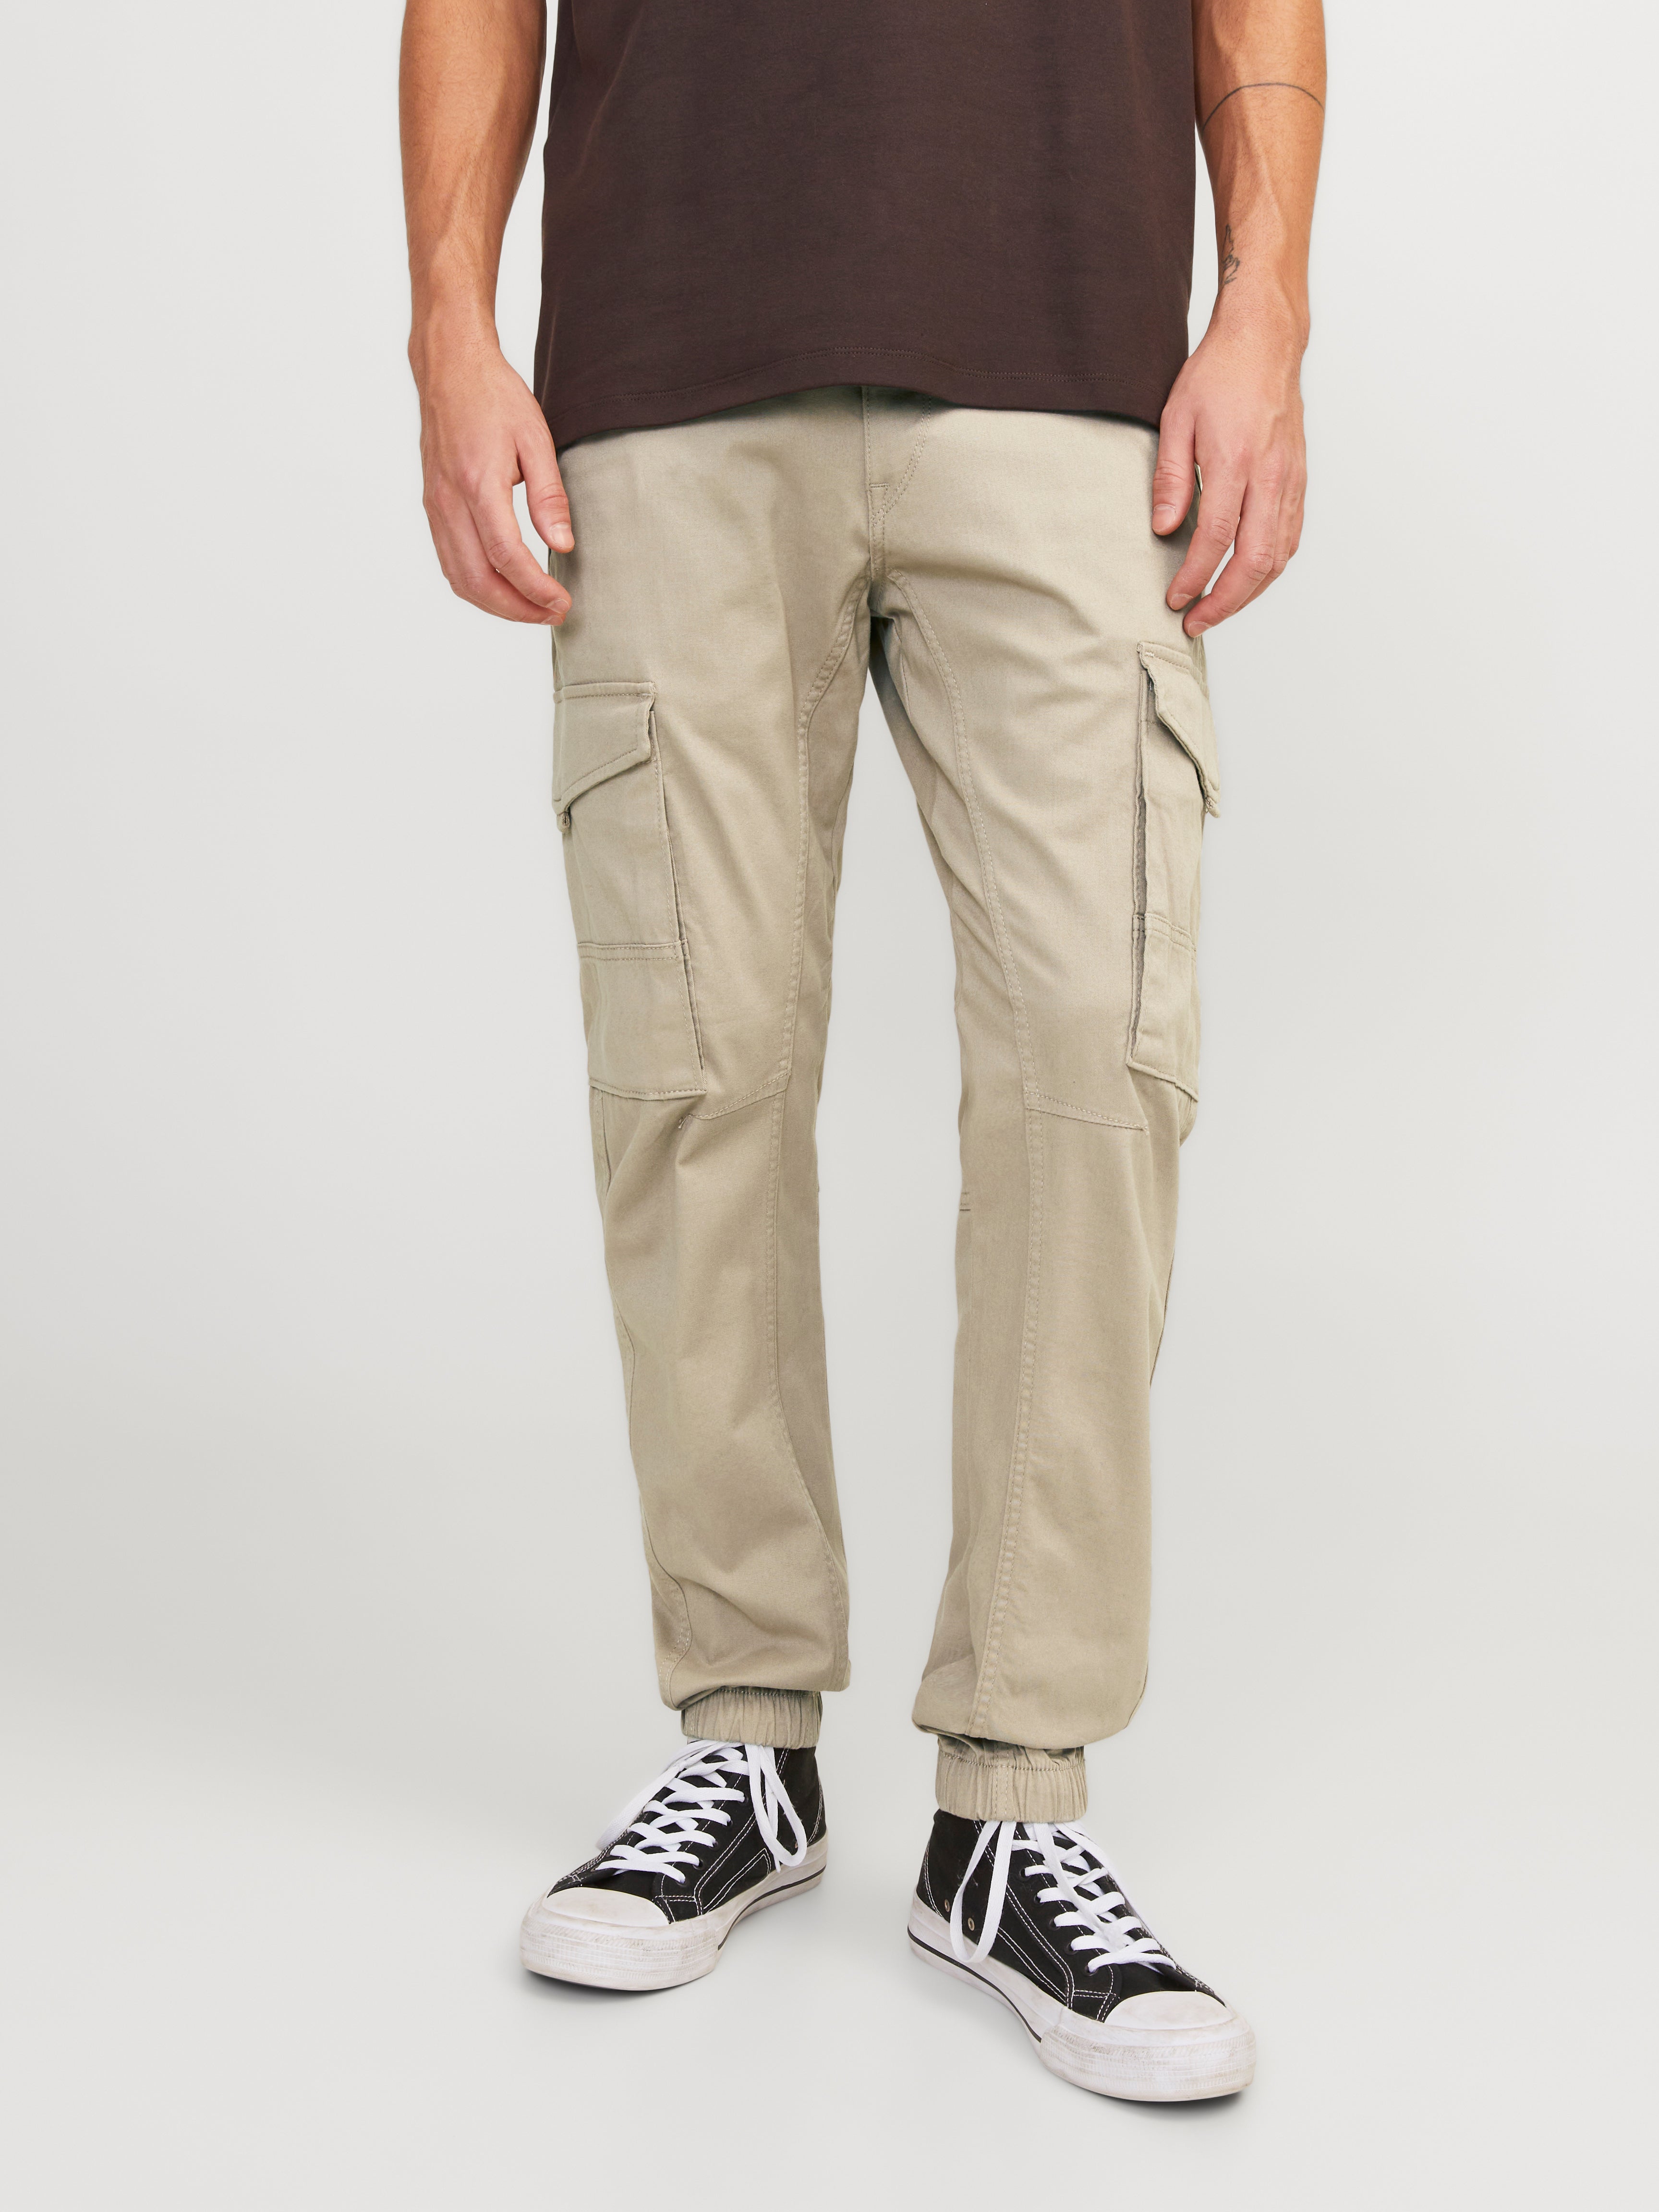 Buy Cream Trousers & Pants for Men by T-Base Online | Ajio.com